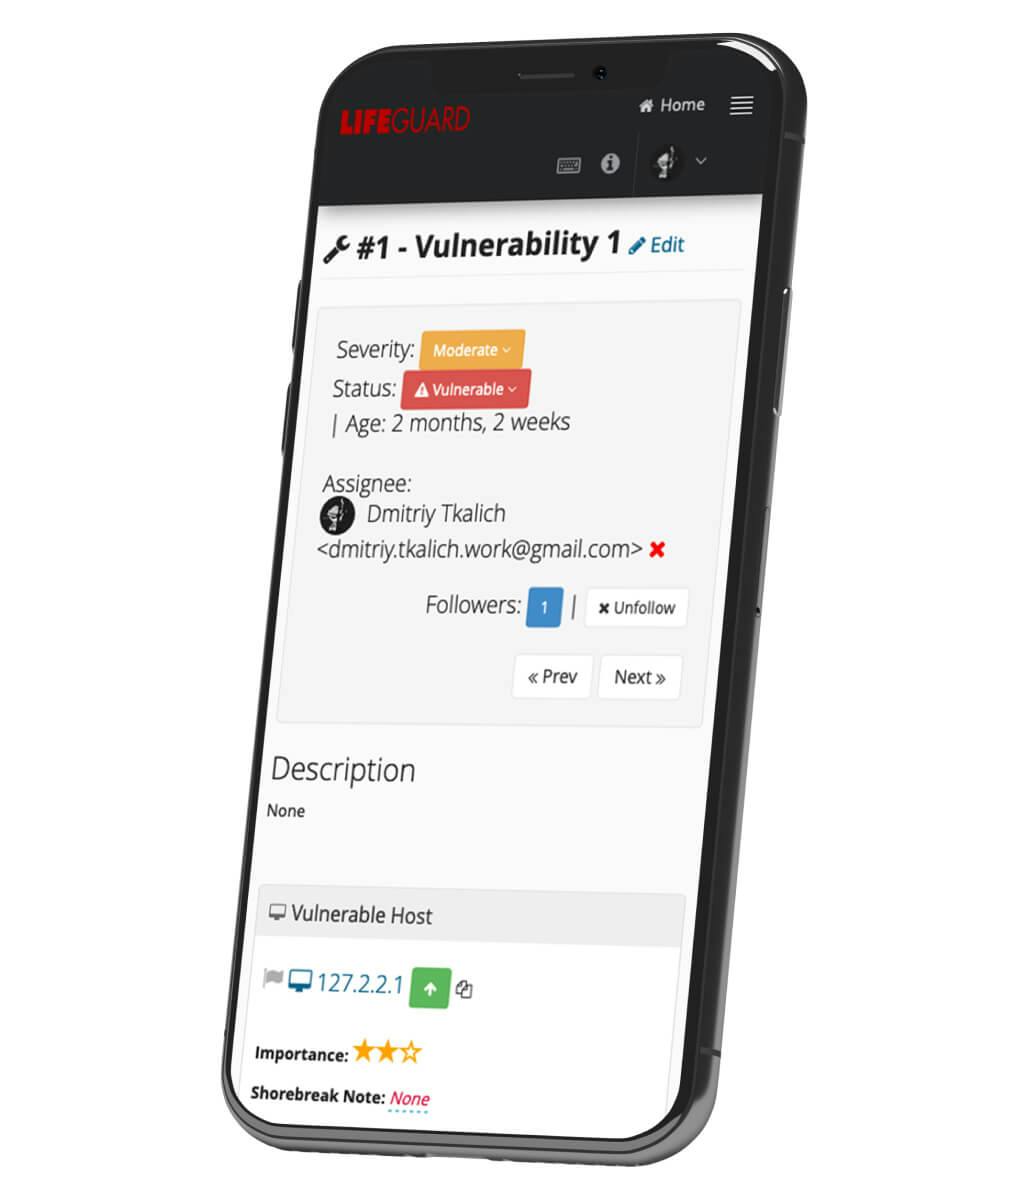 Report for vulnerabilities scanning on mobile device